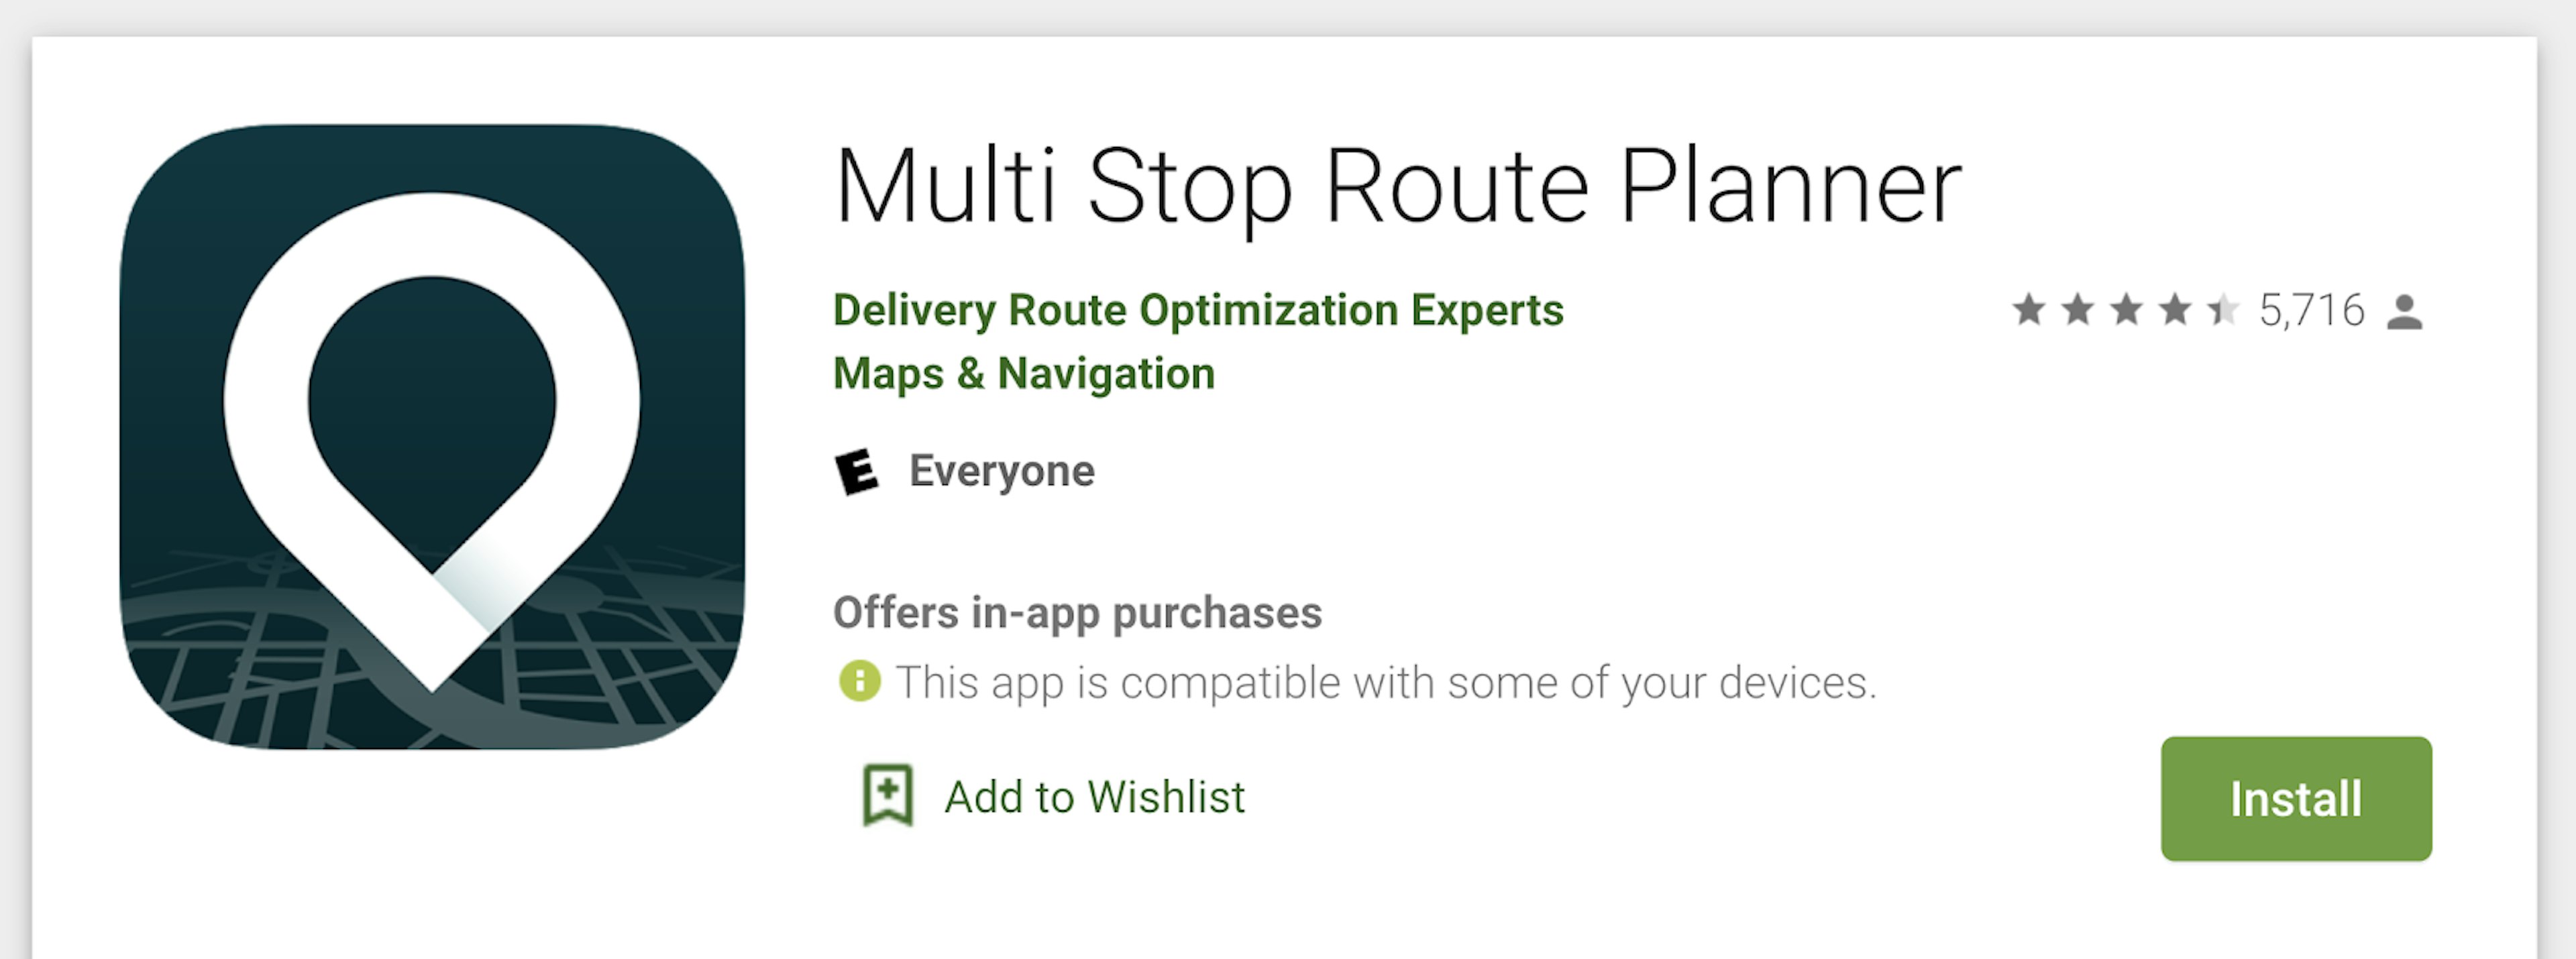 Delivery Drivers Review the Top-rated Mobile Route Planning Apps: Multi Stop Route Planner reviews